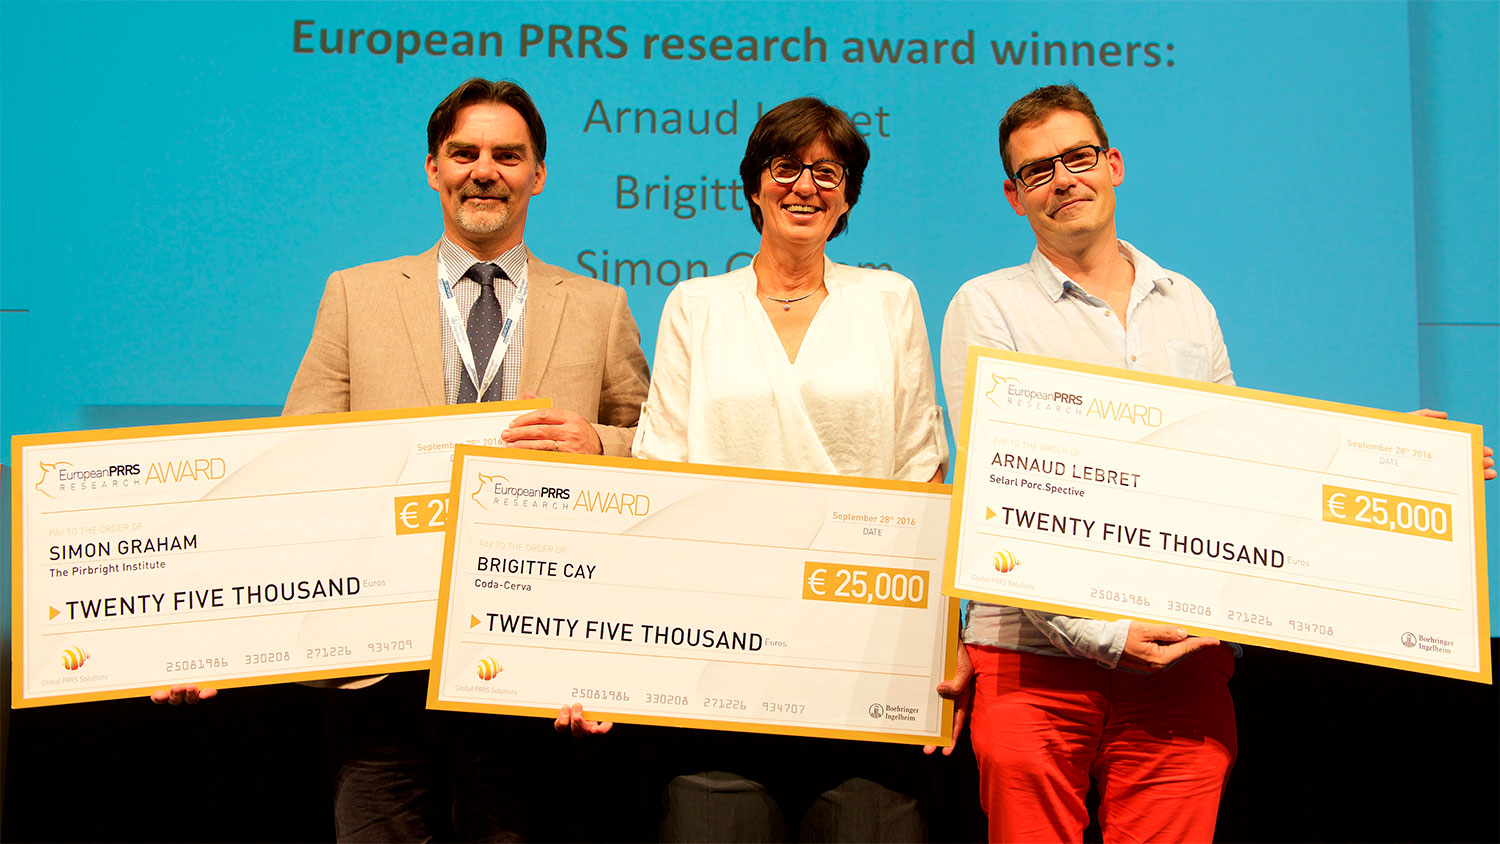 The three winners receive research funding of €25,000 each